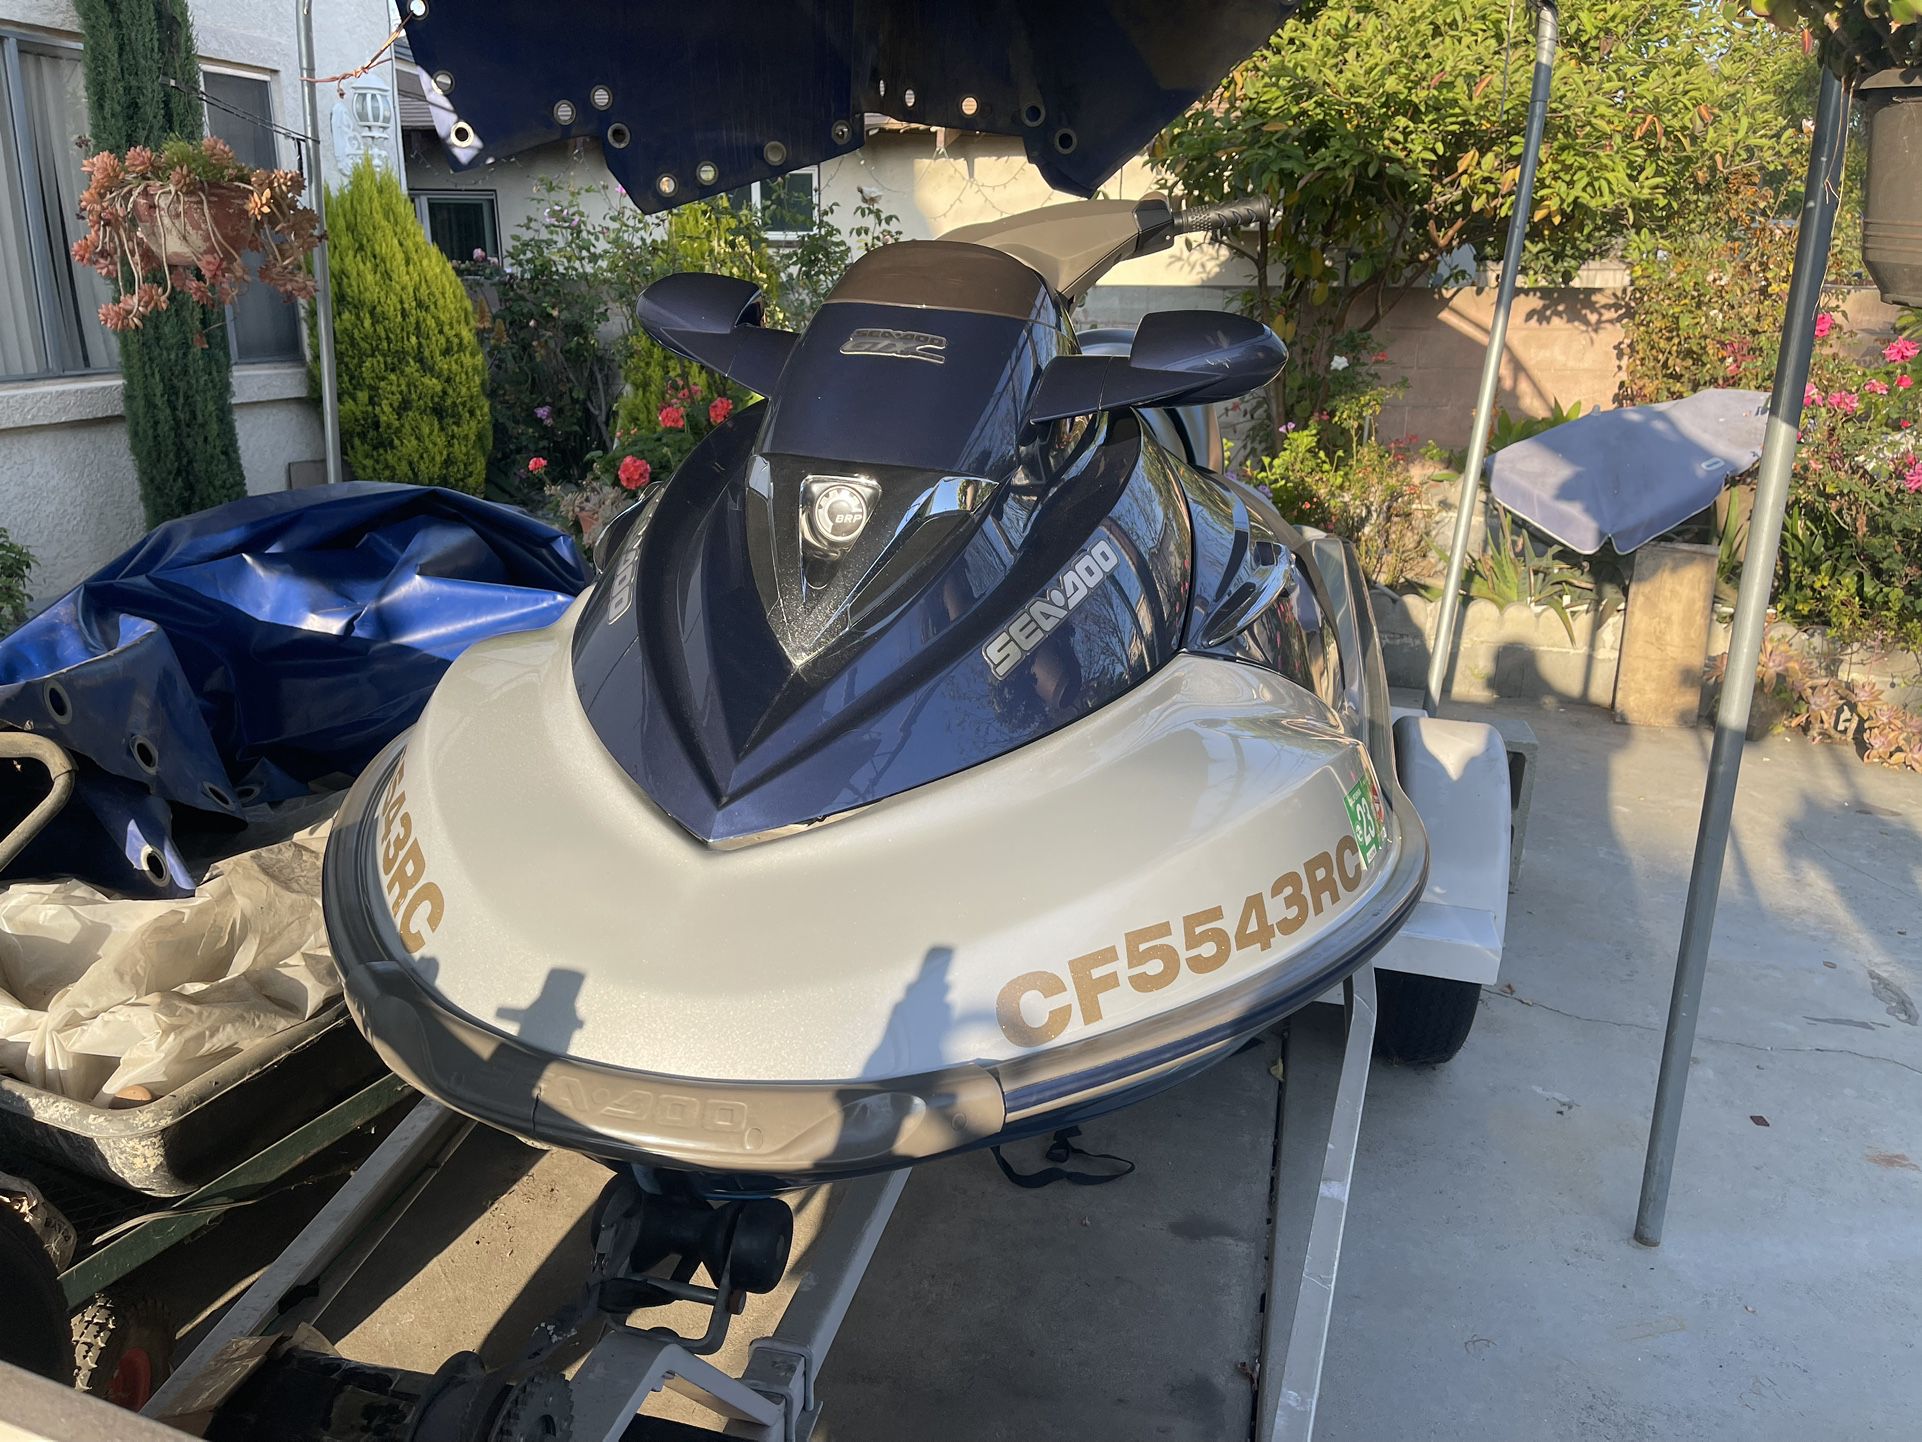 2004 Sea Doo GTX Supercharged (Trailer Included)